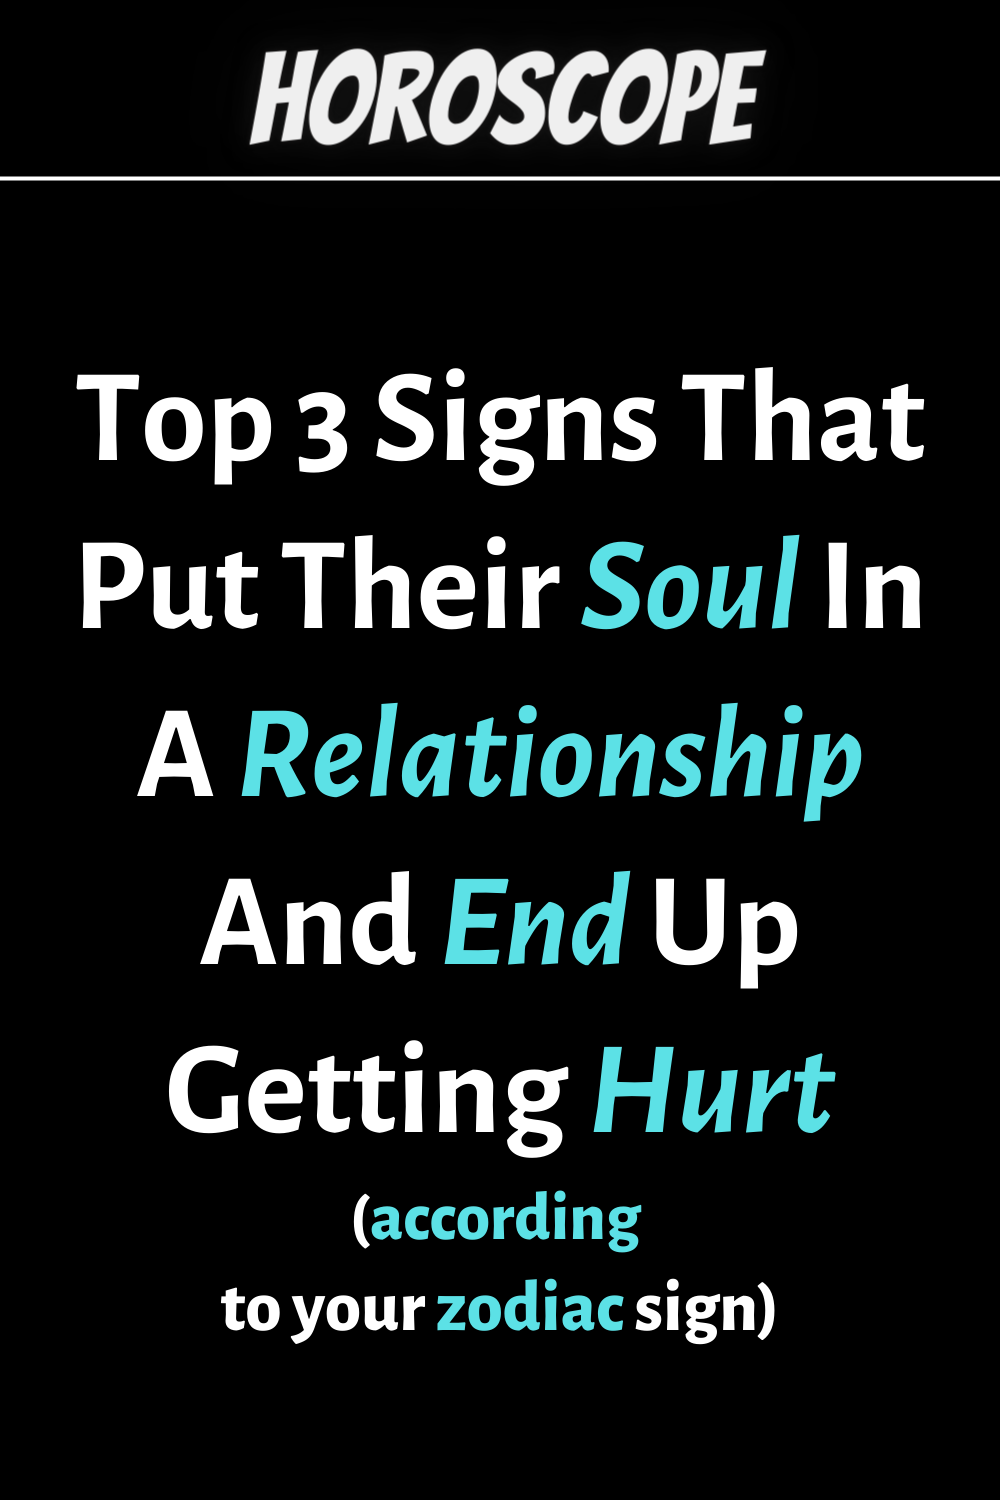 Top 3 Zodiac Signs That Put Their Soul In A Relationship And End Up Getting Hurt